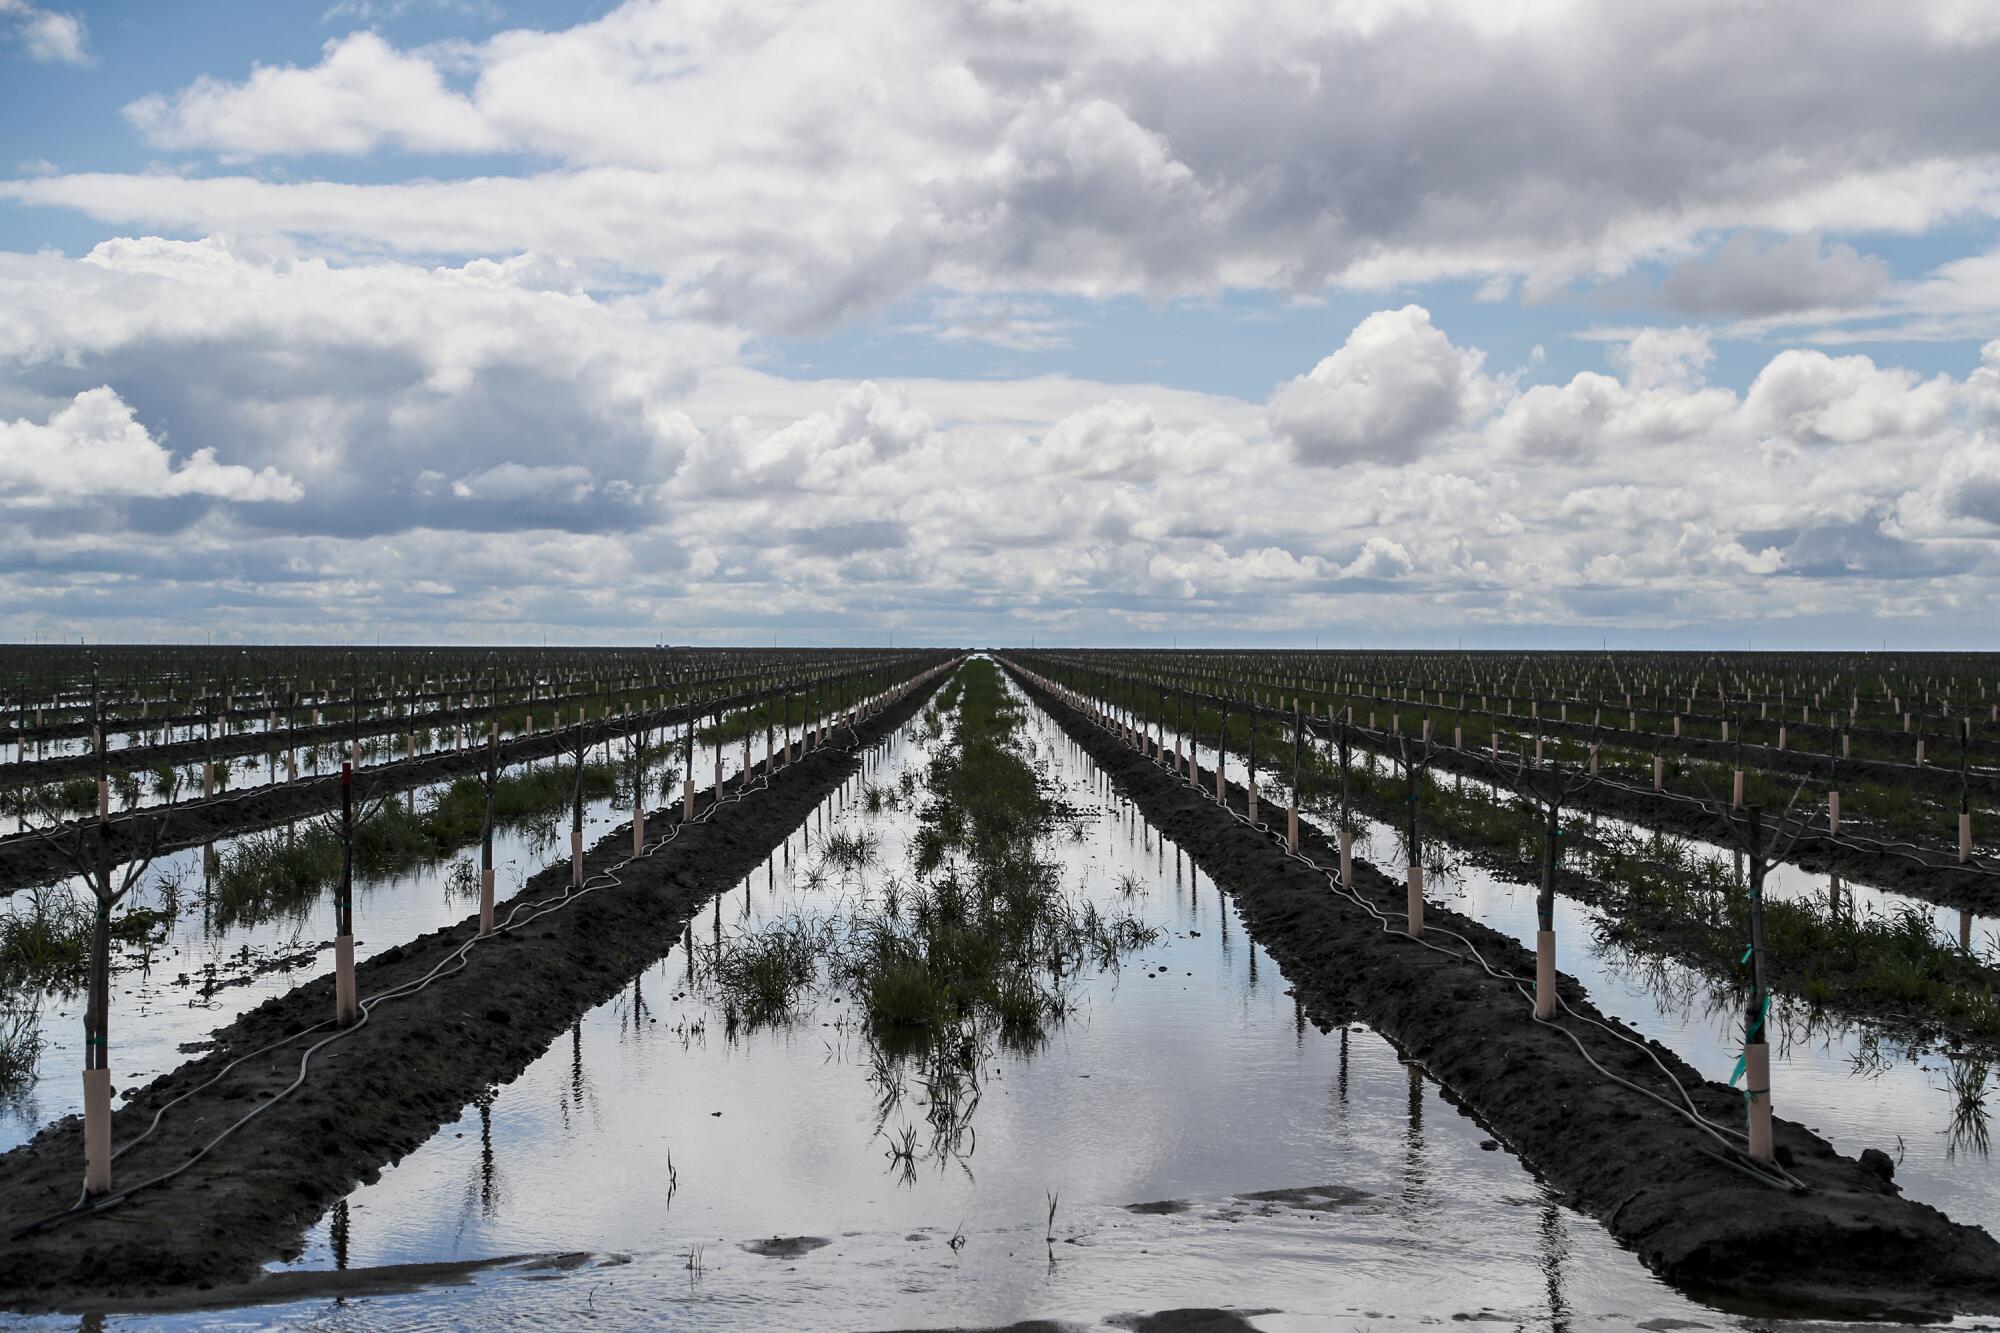 Floodwaters fill an agricultural field.